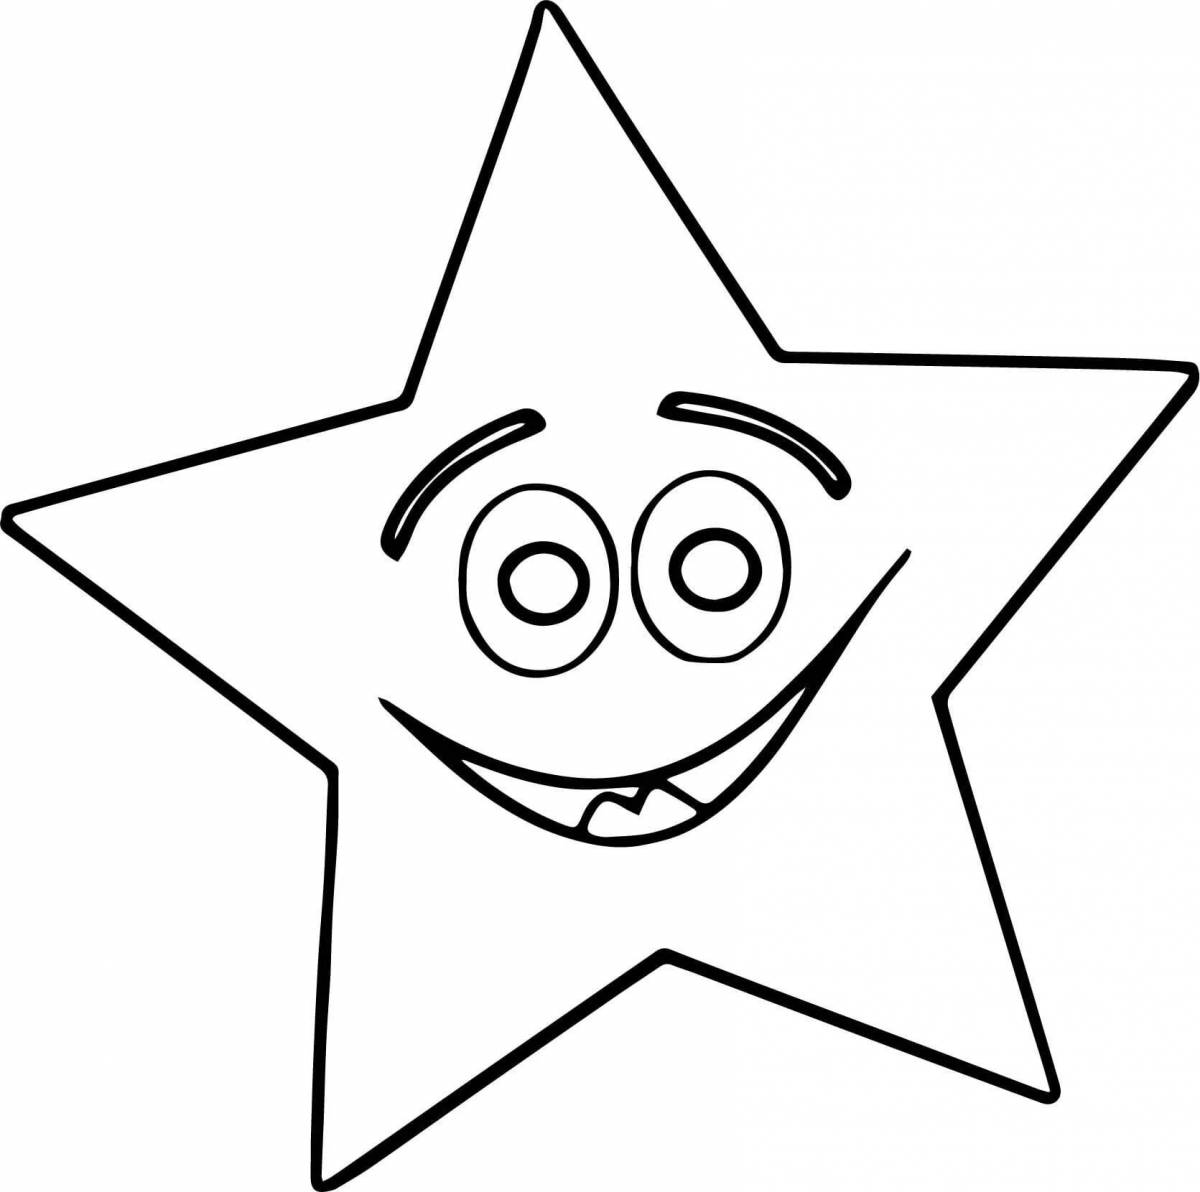 Amazing star coloring book for kids